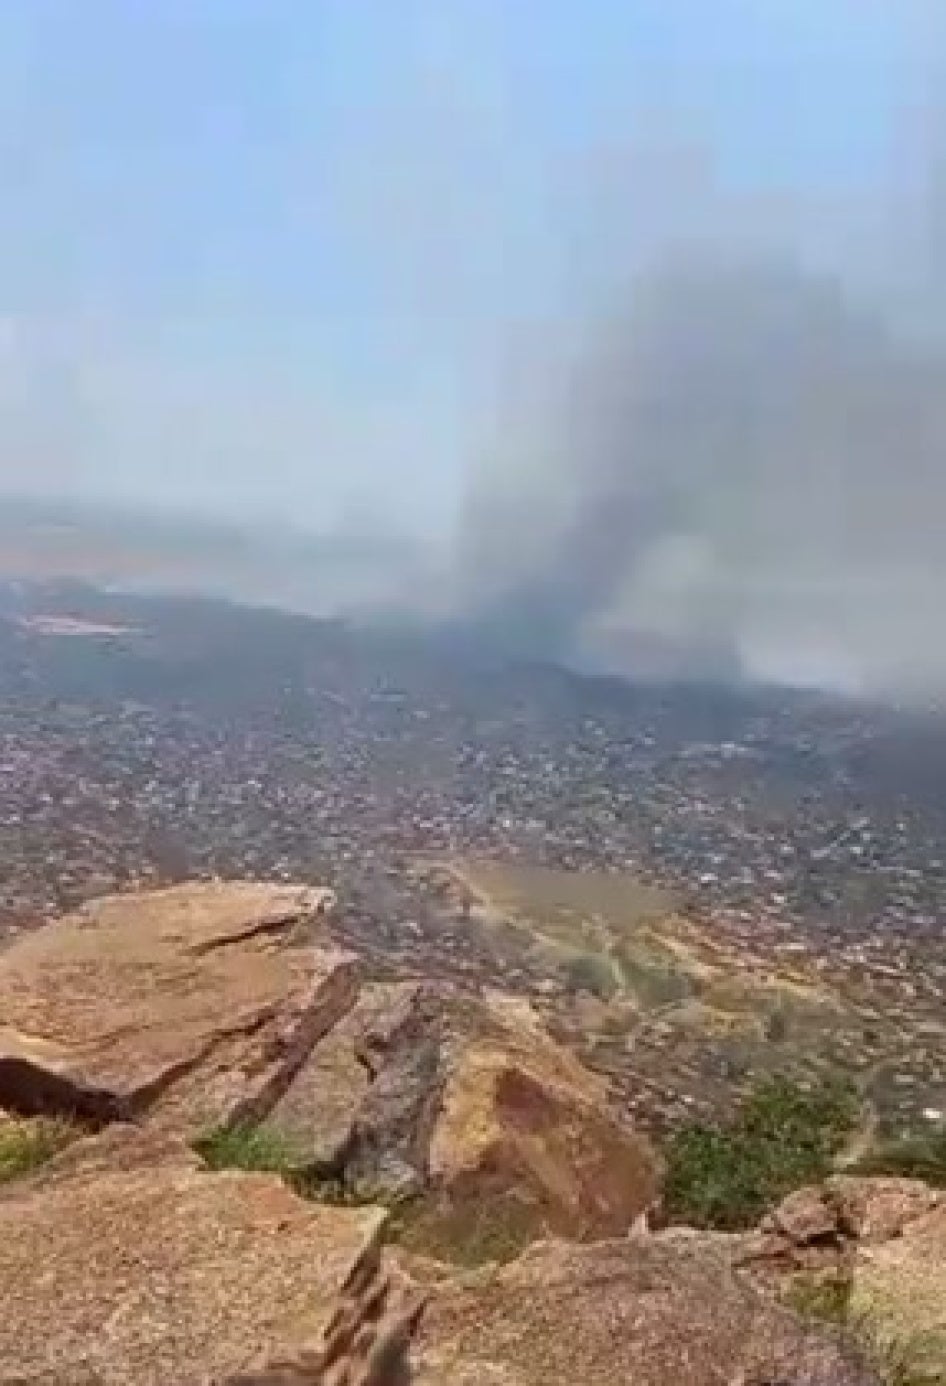 View of fires burning in a town